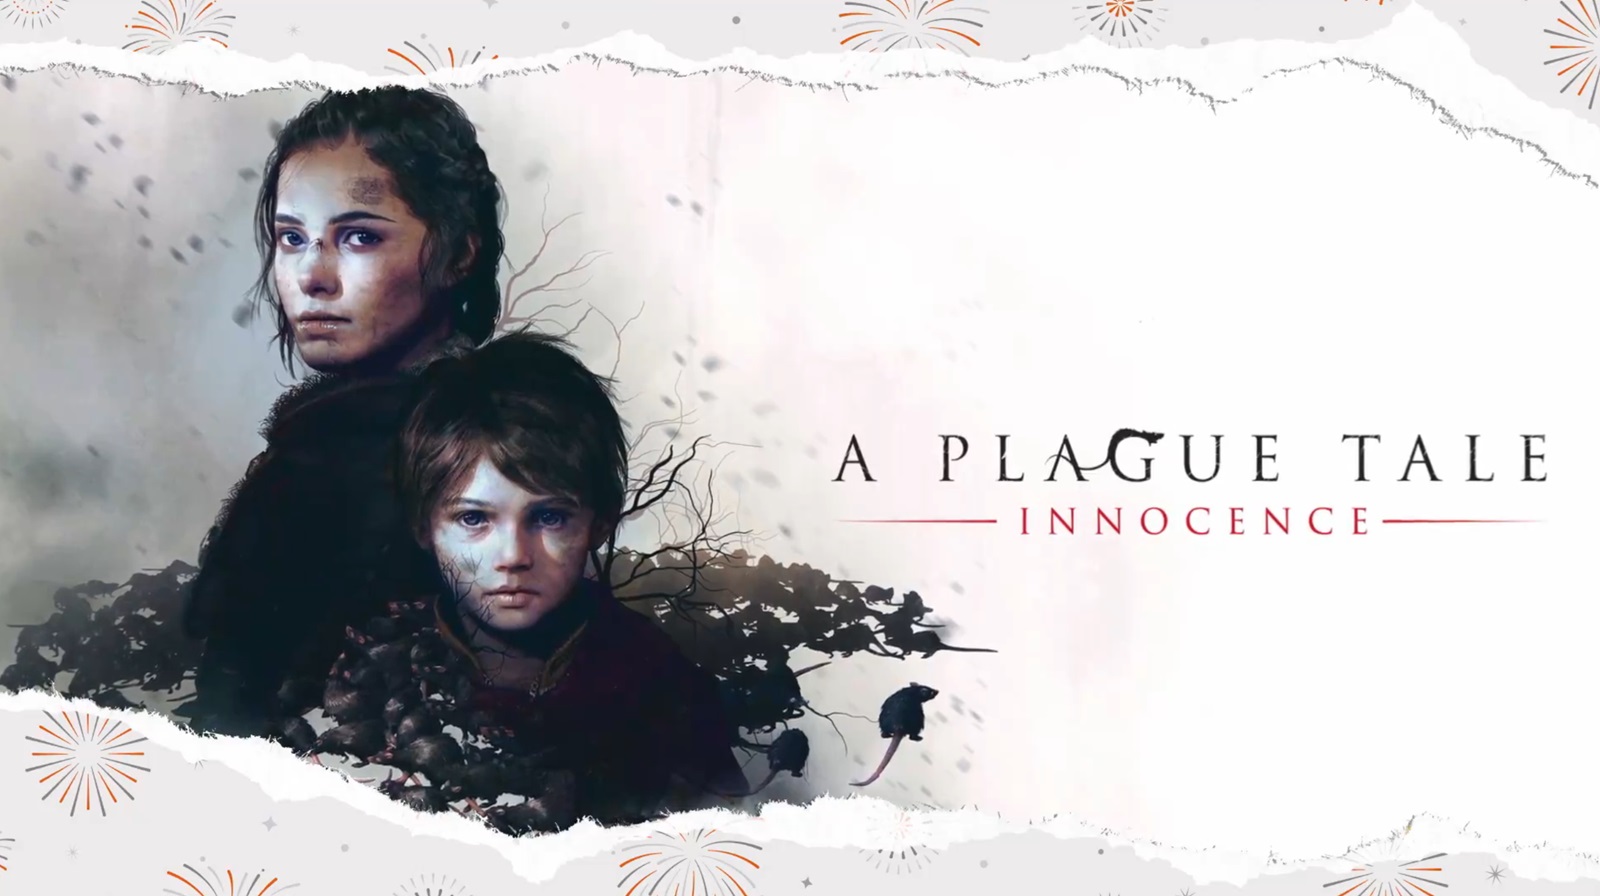 A Plague Tale Innocence is currently available for free on PC through the Epic Games Store